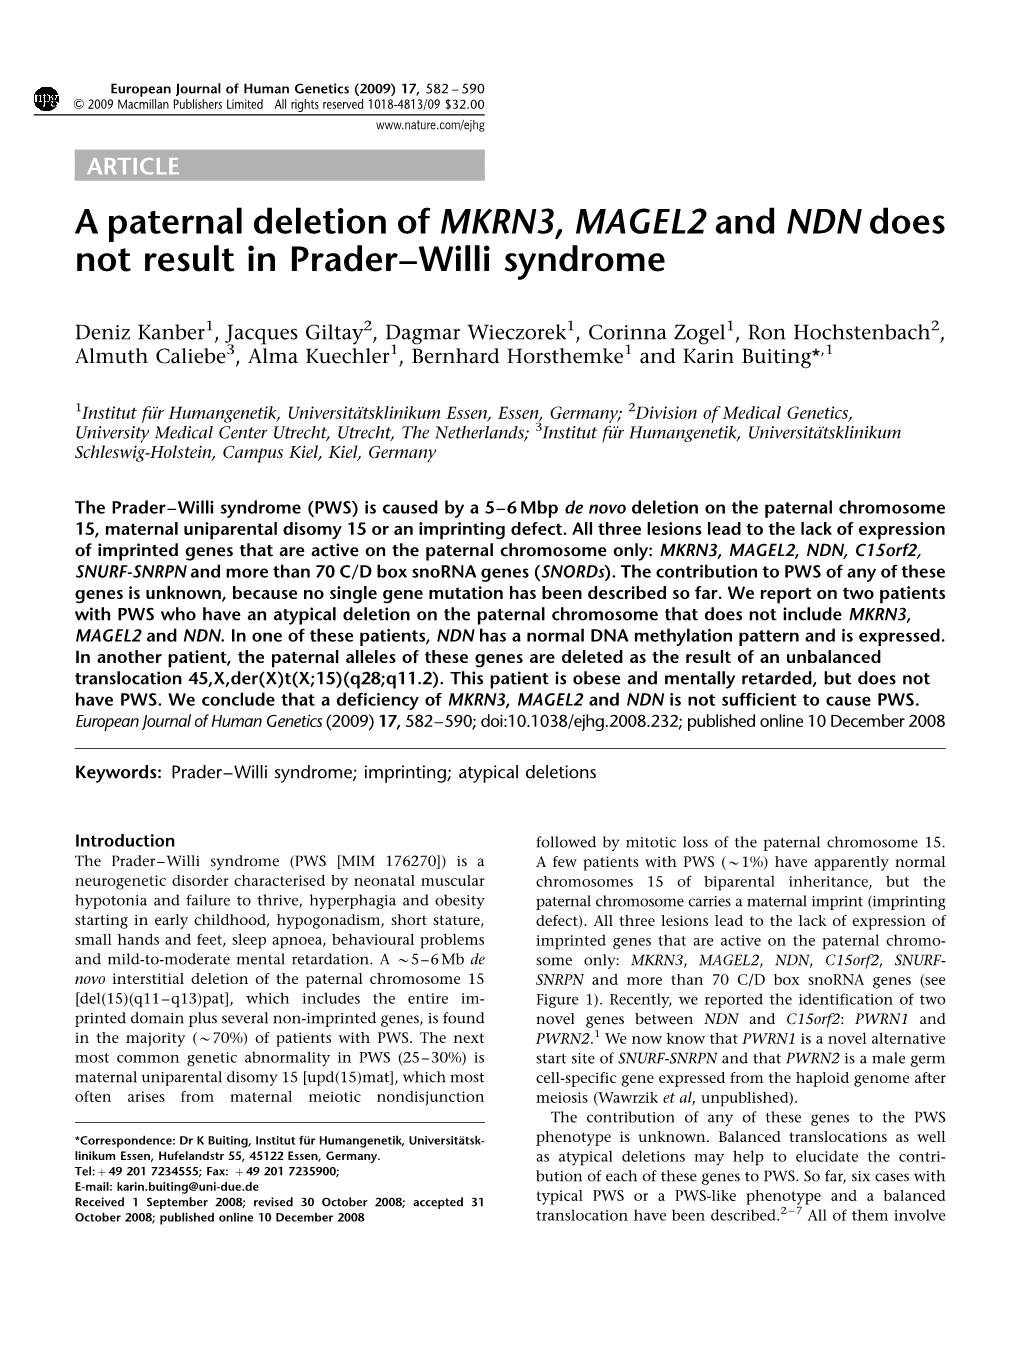 A Paternal Deletion of MKRN3, MAGEL2 and NDN Does Not Result in Prader–Willi Syndrome